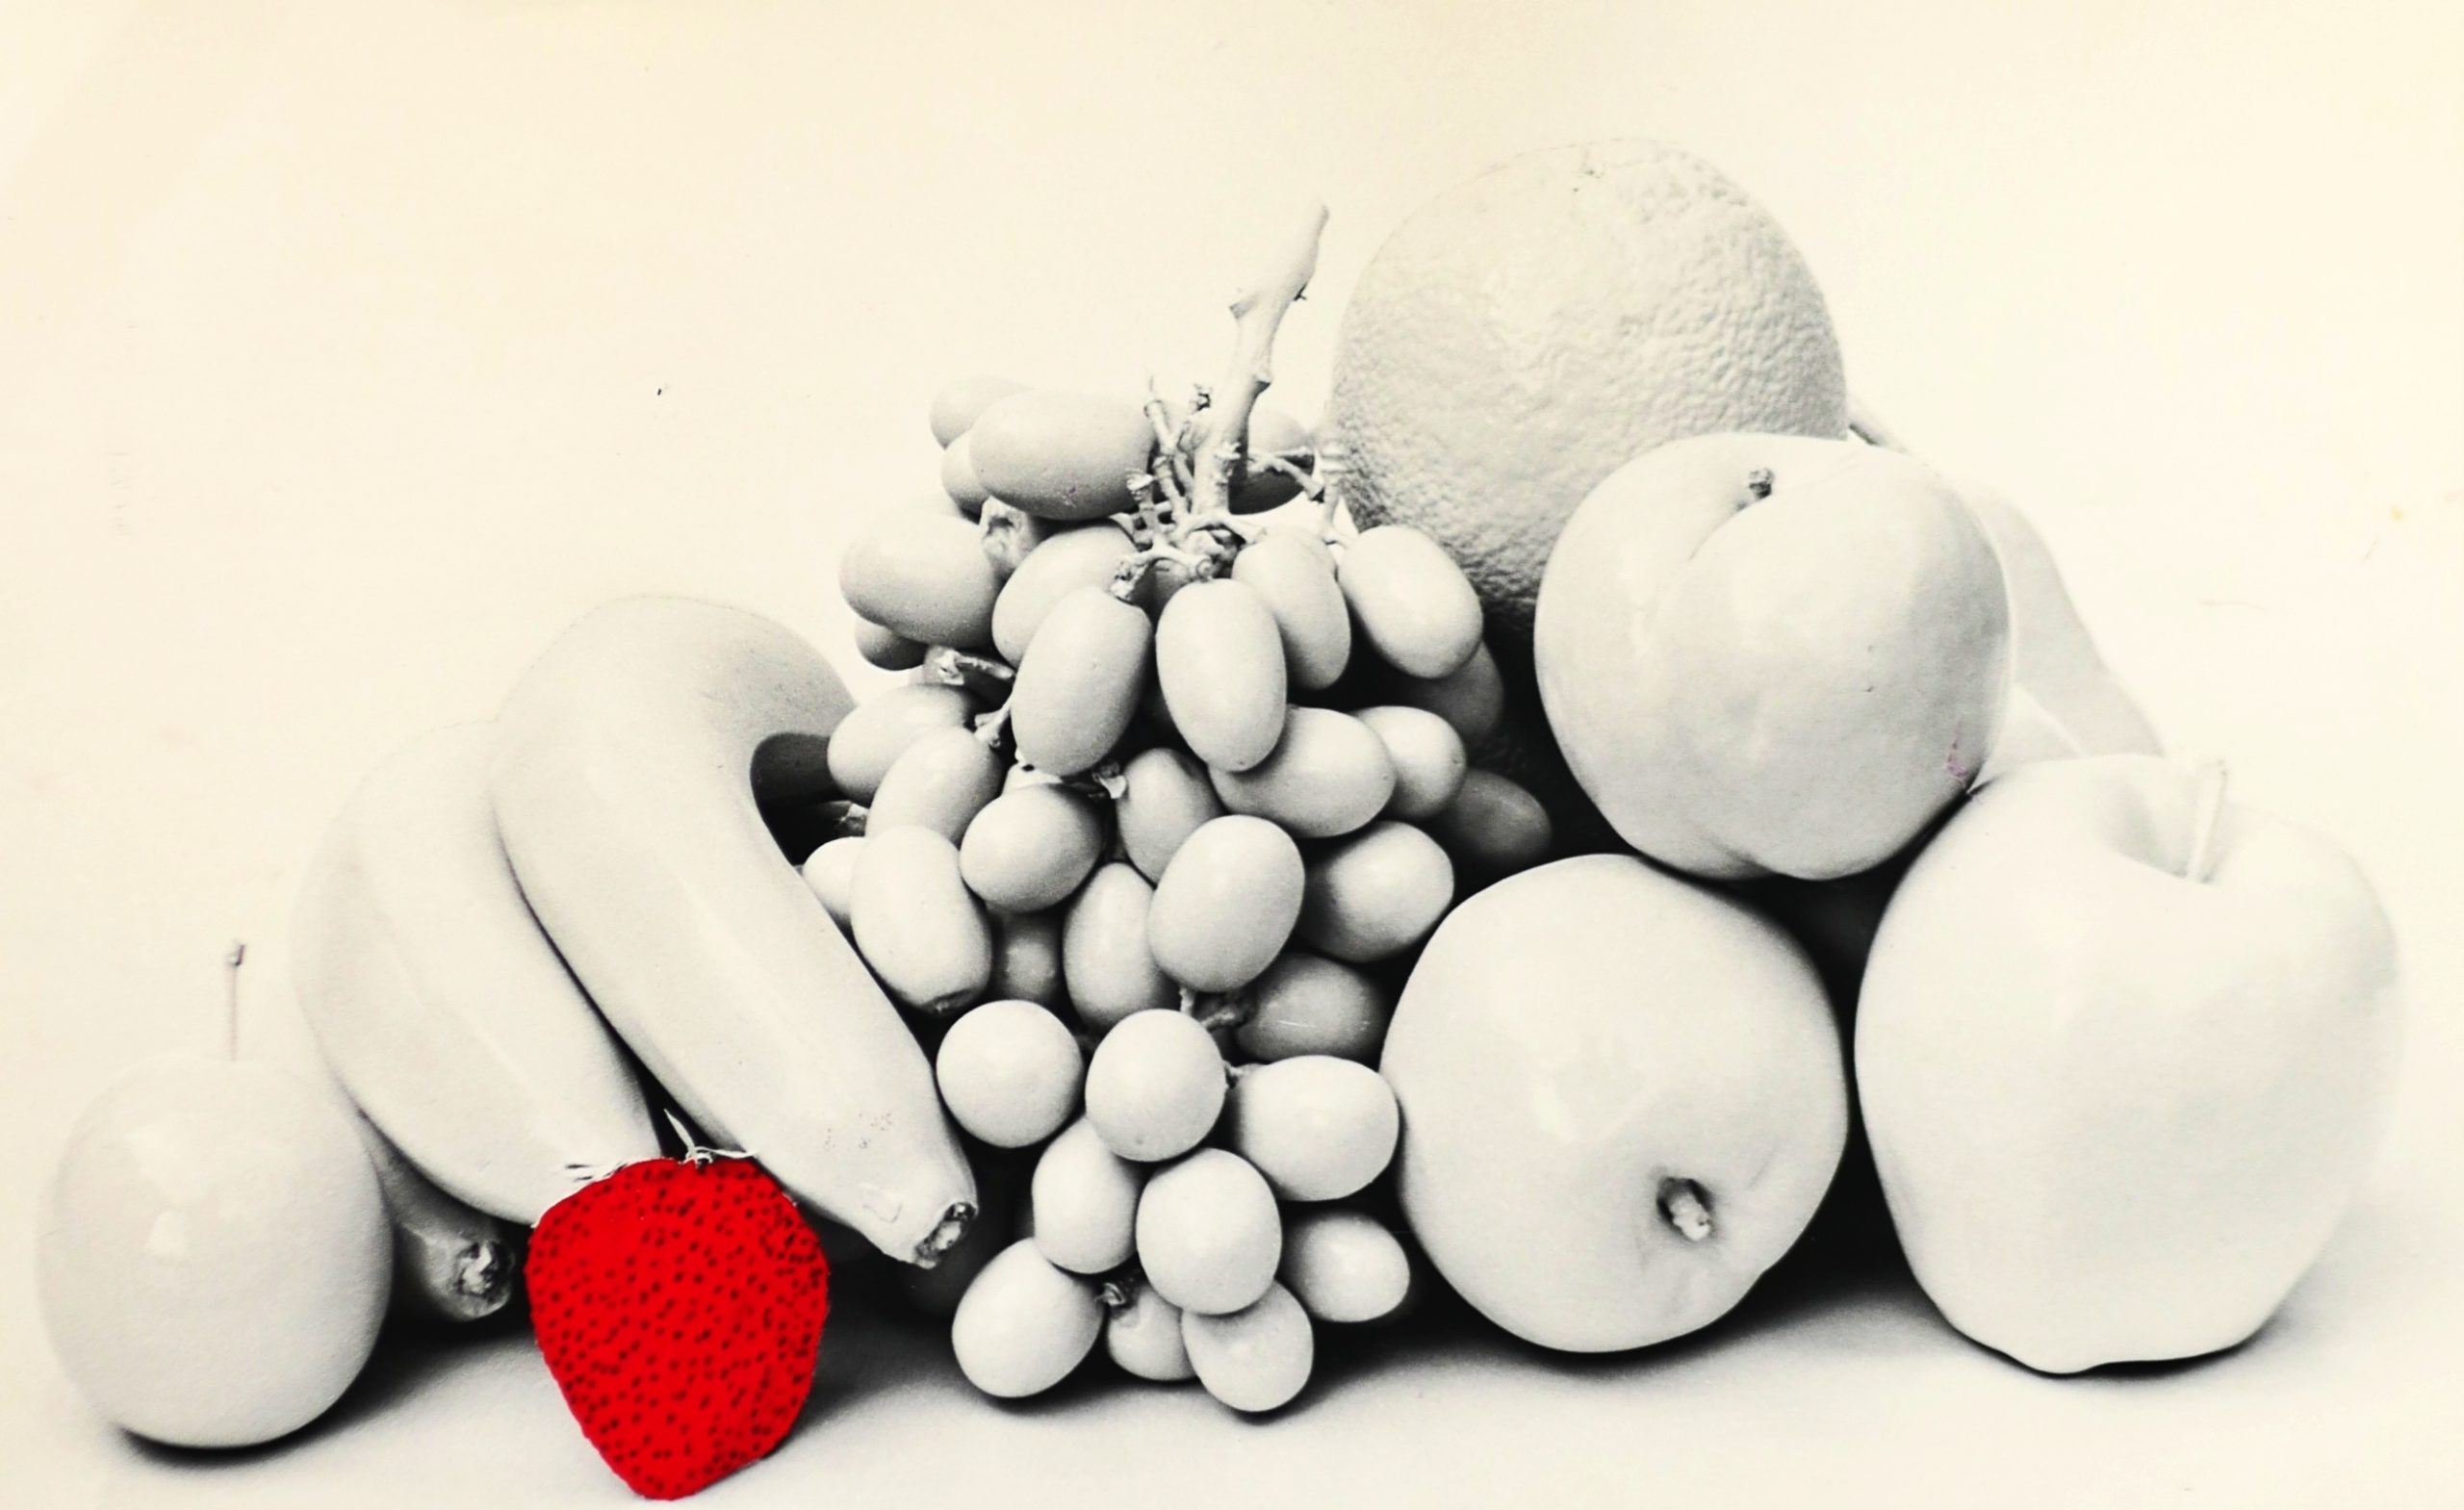 Black and white photo of well placed fruit, portrait of fruit with only a single colored red strawberry